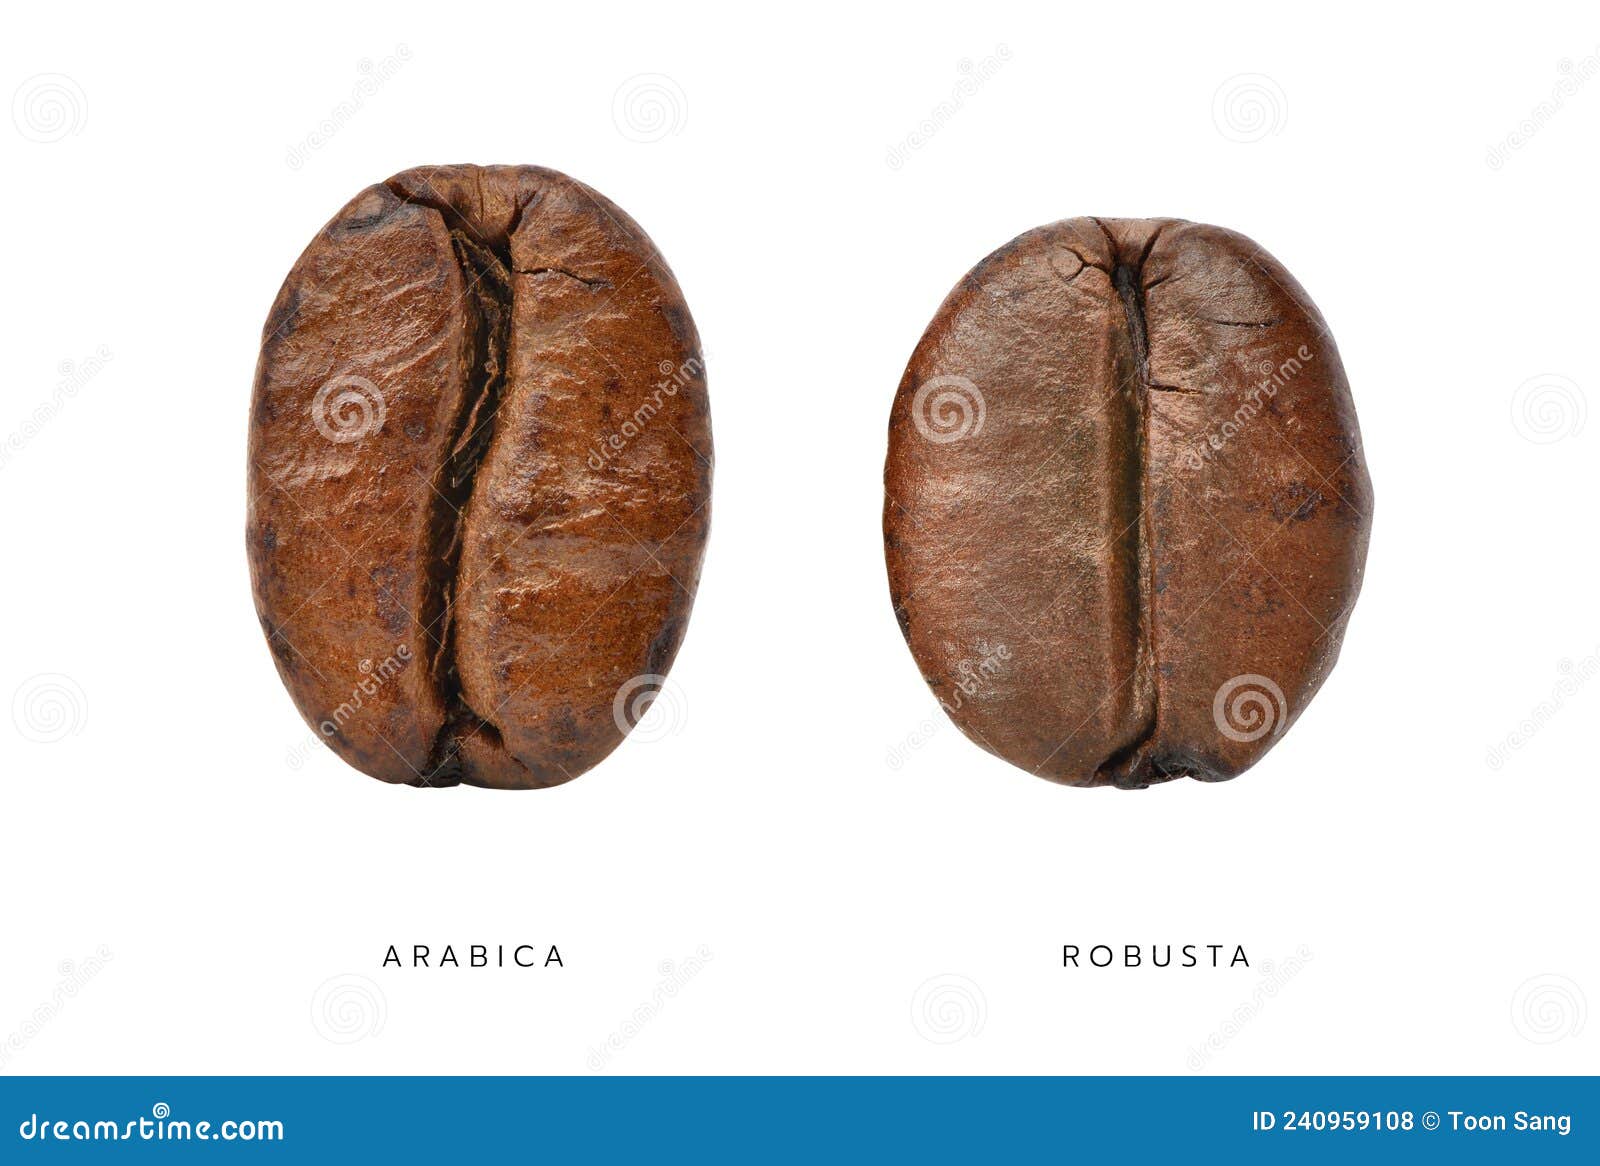 comparative of arabica and robusta coffee beans